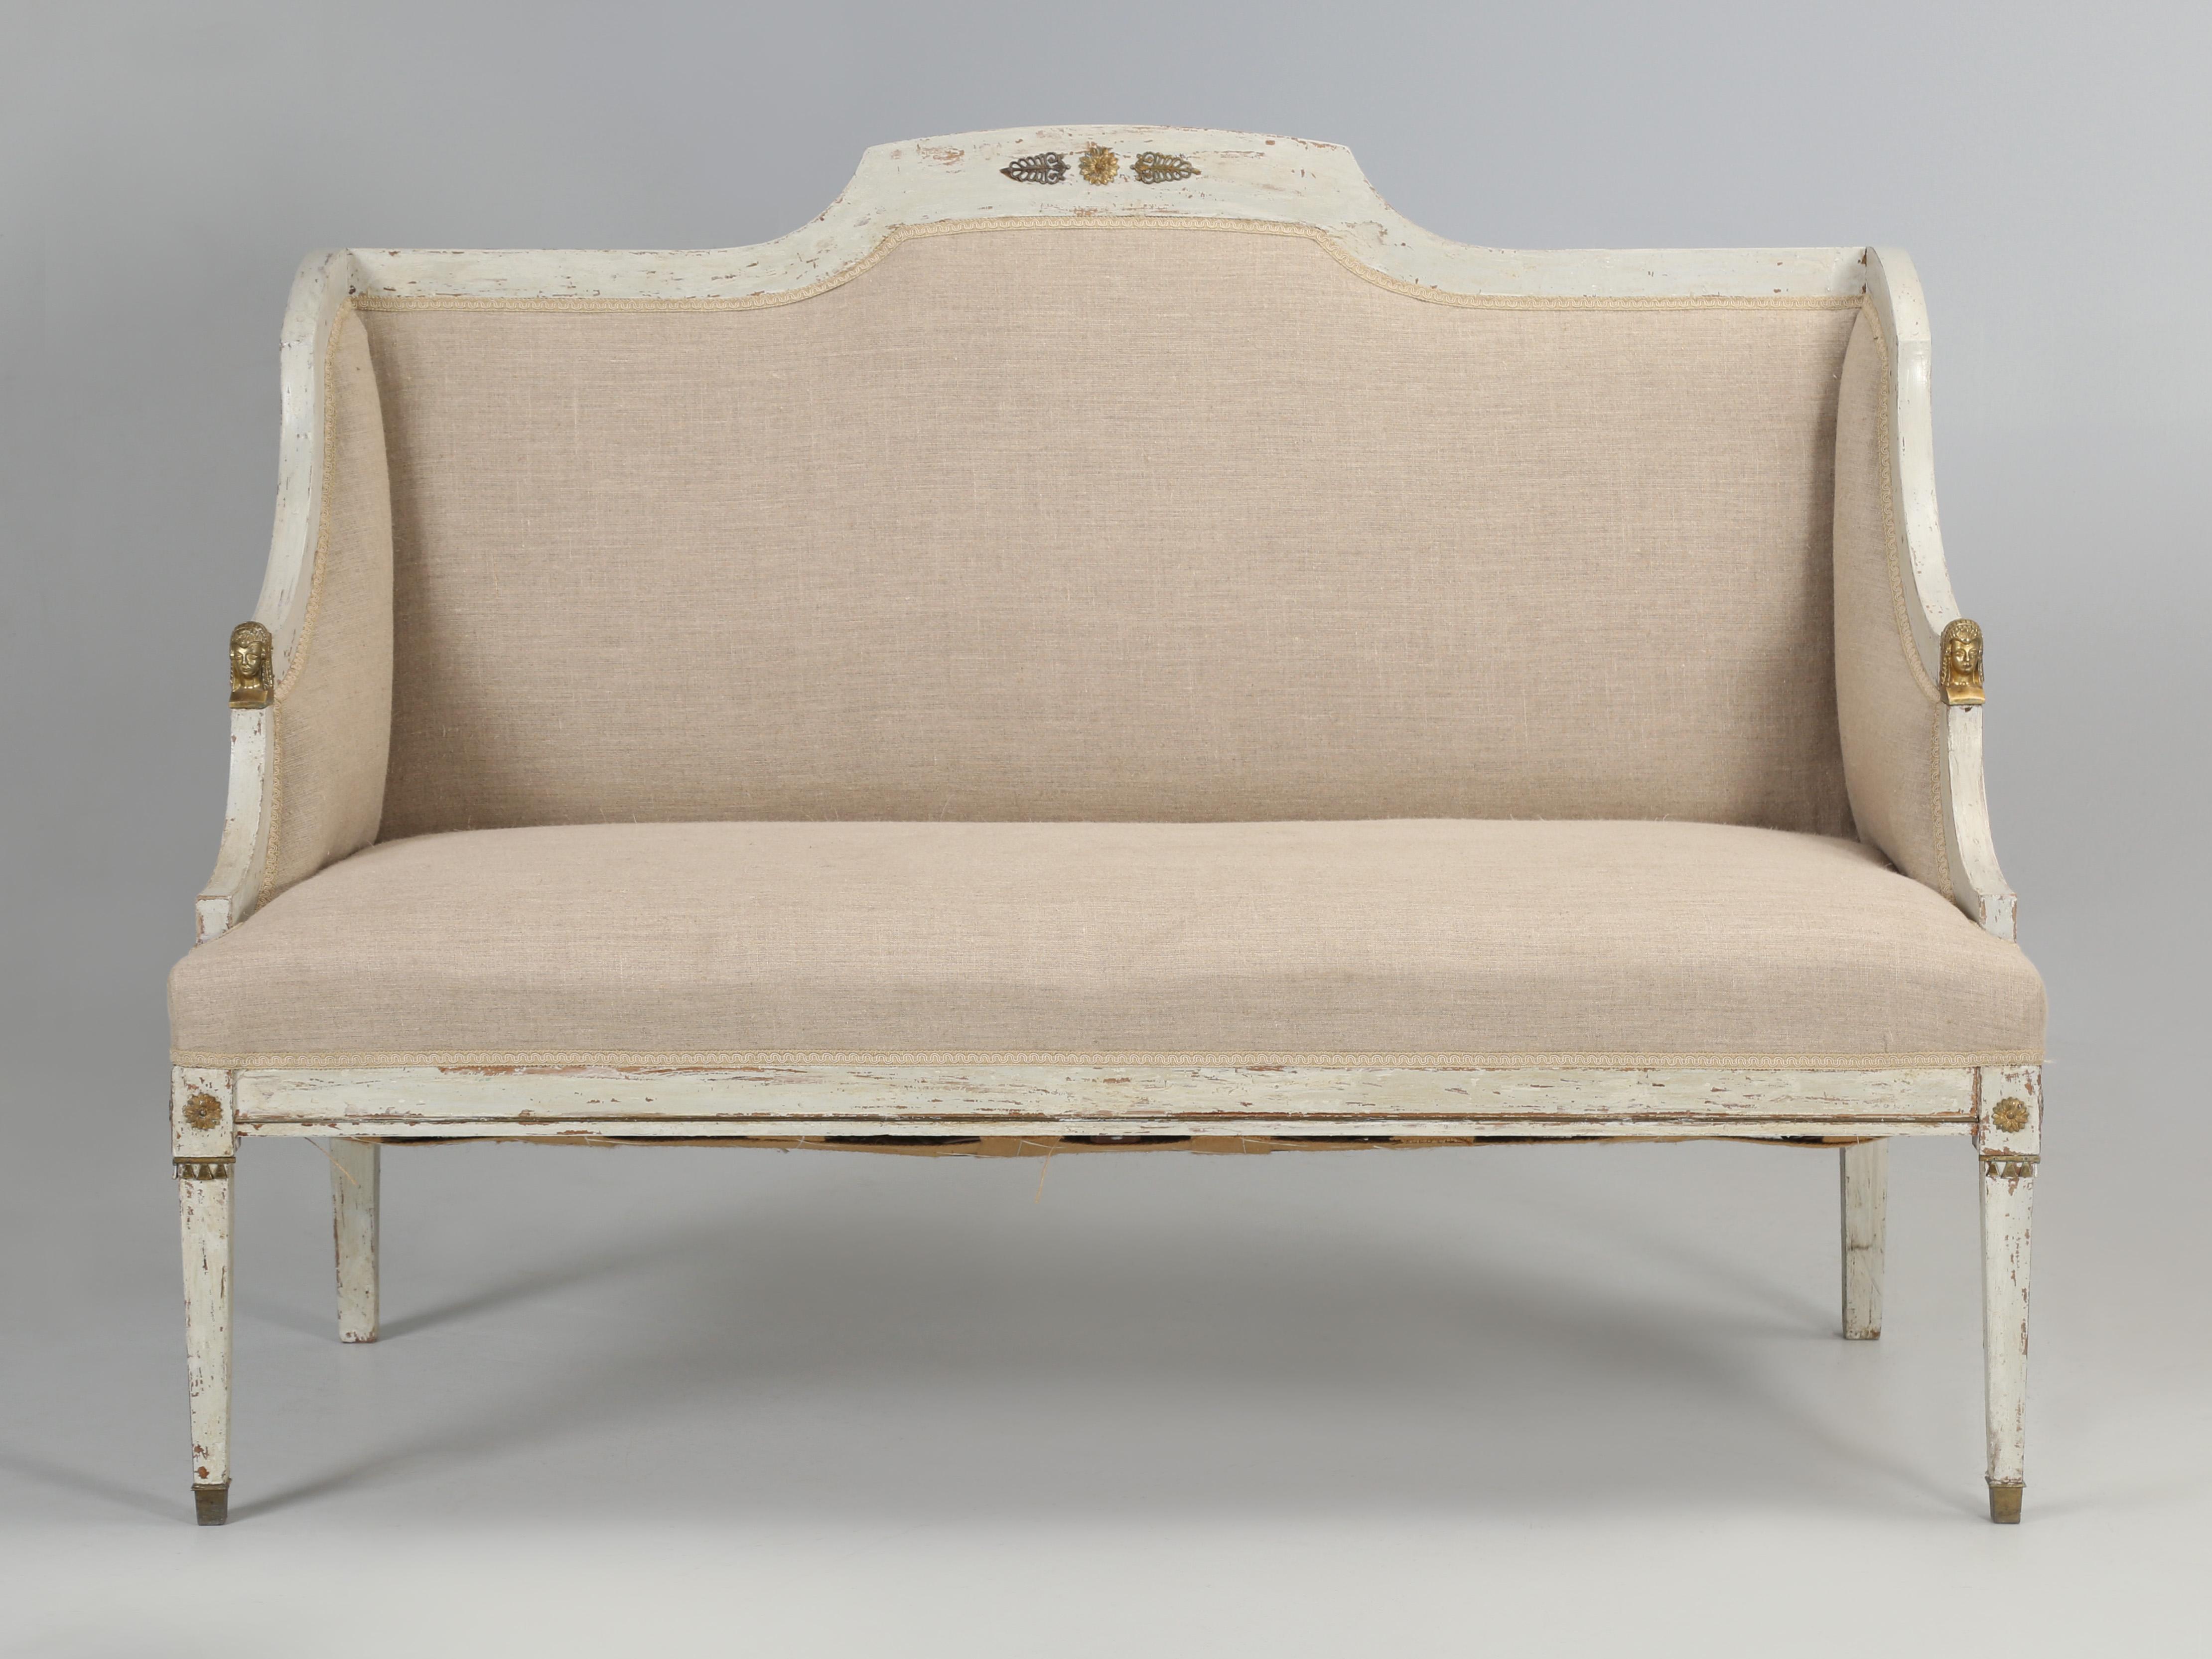 Antique Swedish Gustavian Settee in a classic putty grey paint that leans towards the blues. The linen fabric on our Gustavian settee appears to be fairly recent, although we have no personal knowledge of where it was reupholstered. Paint appears to